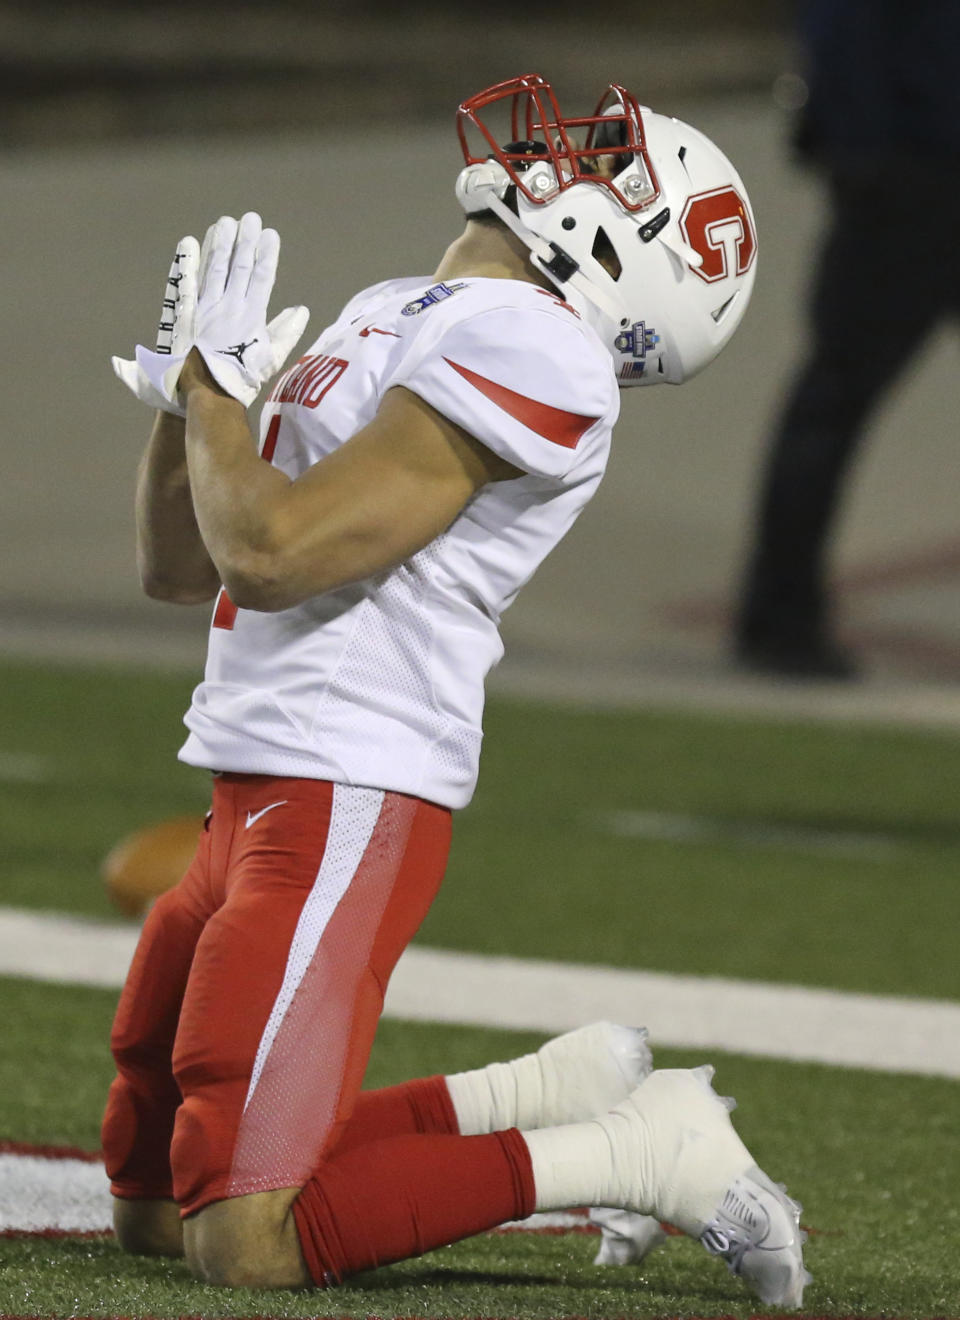 Cortland's JJ Laap (4) celebrates a touchdown against North Centra lduring the second half of the Amos Alonzo Stagg Bowl NCAA Division III championship football game in Salem, Va., Friday Dec. 15, 2023. (Matt Gentry/The Roanoke Times via AP)